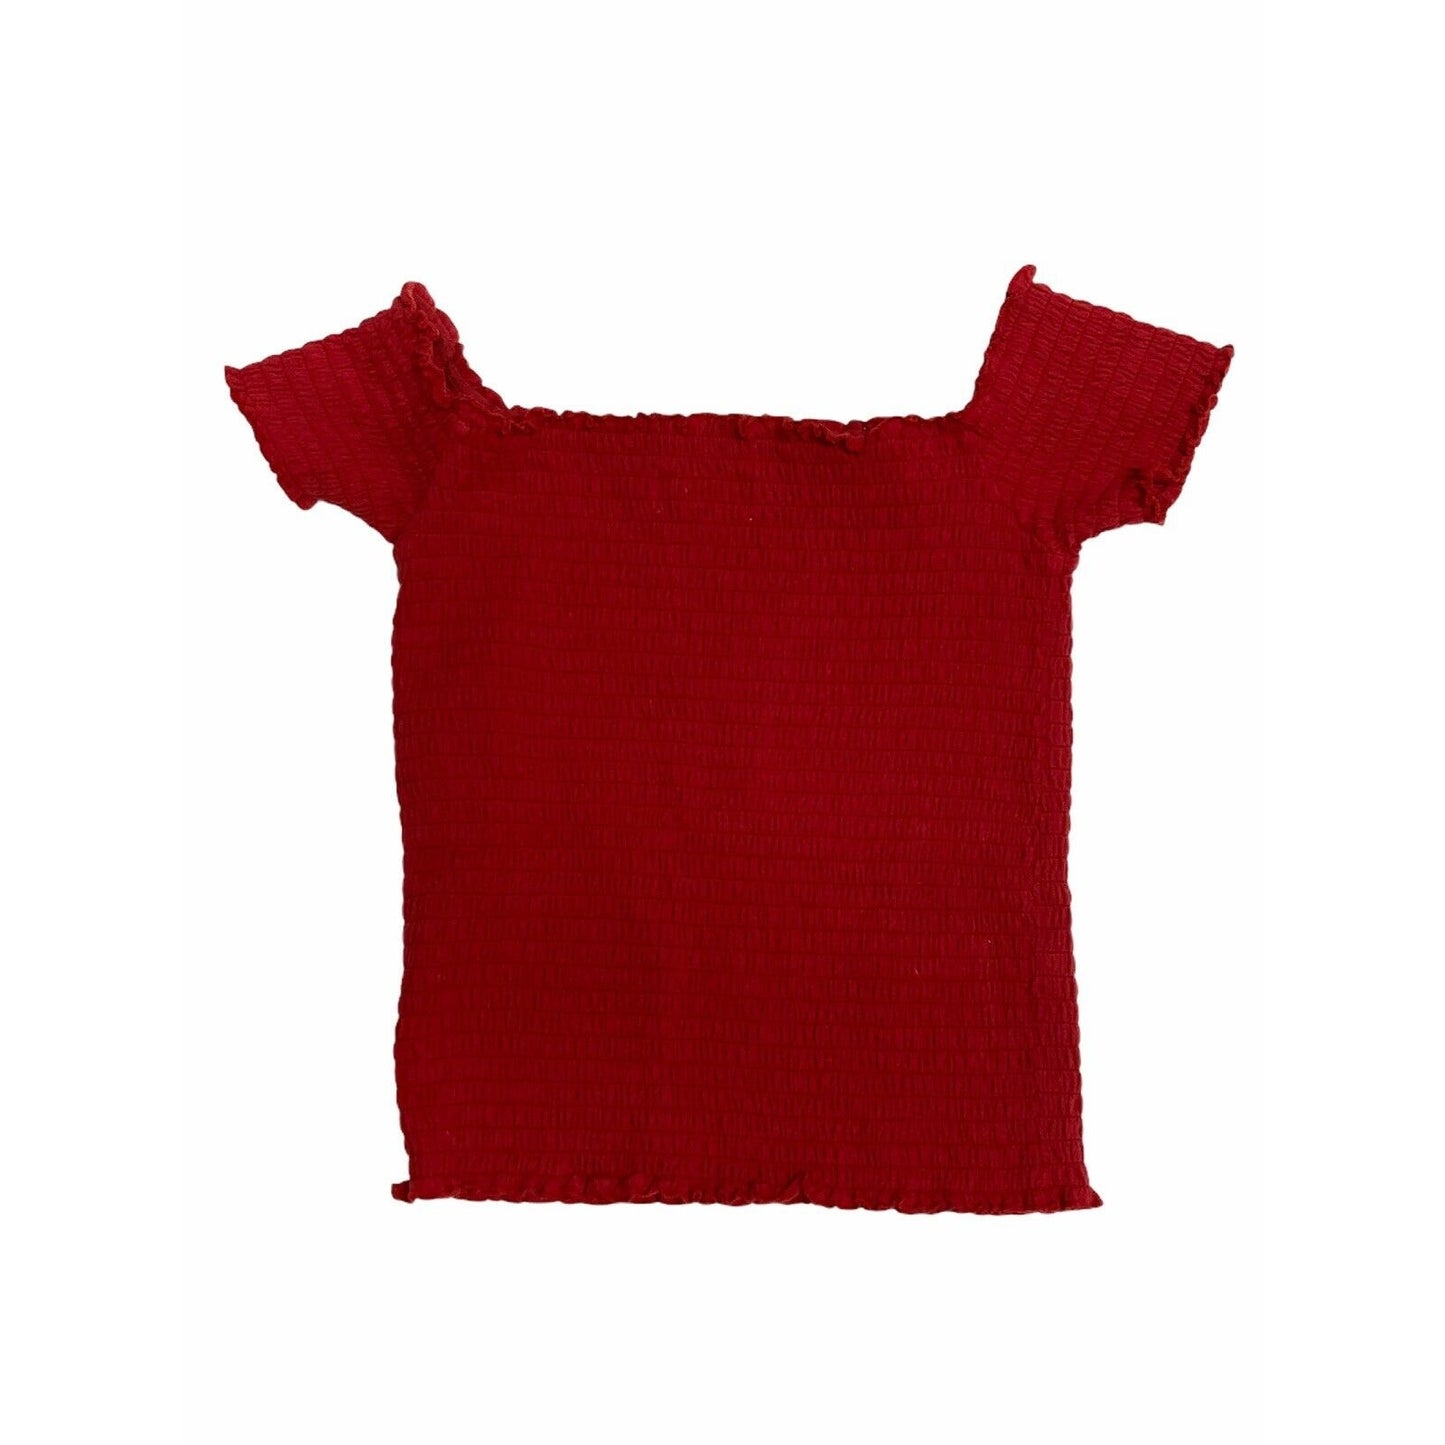 Hollister Elastic Stretchy Red Blouse Crop Top Size Small S